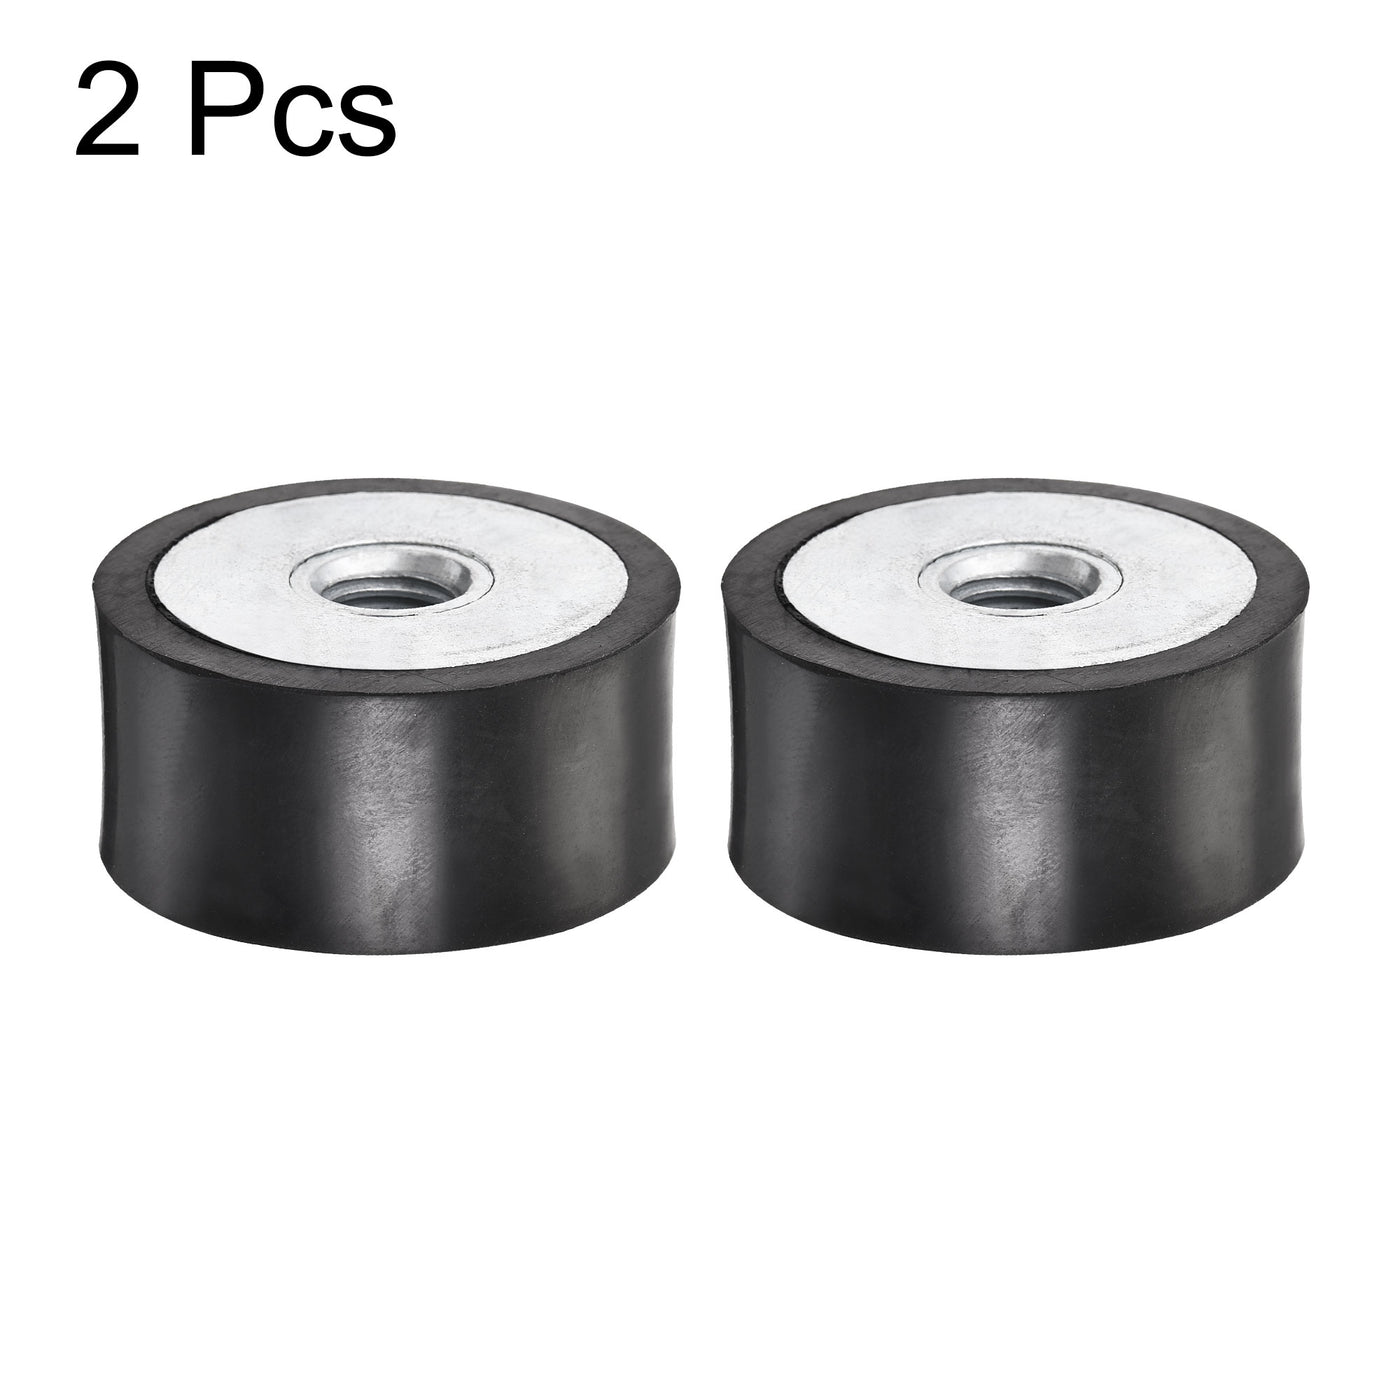 uxcell Uxcell M10 Rubber Mounts, 2pcs Female/Female Shock Absorber, D40mmxH20mm